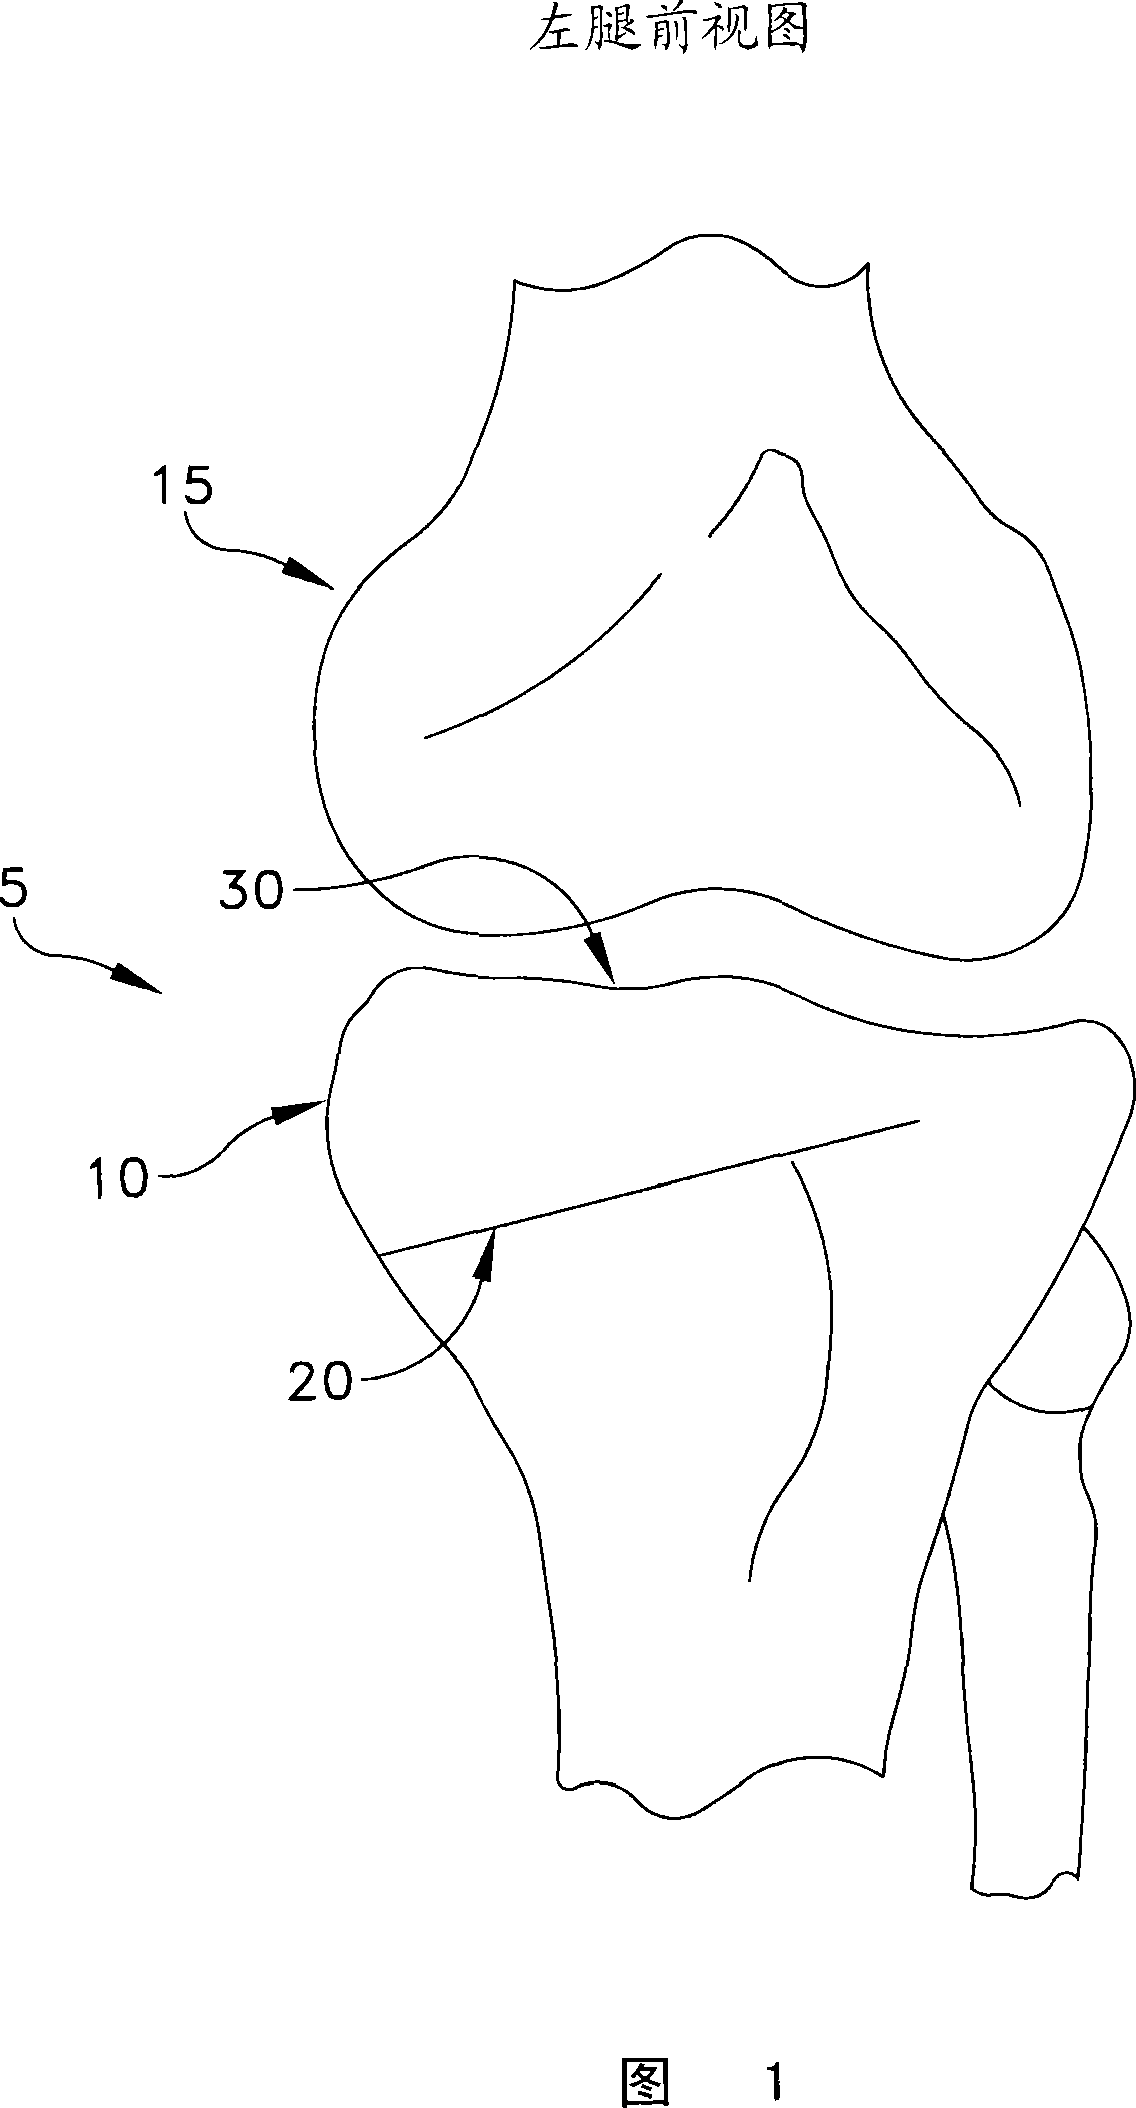 Apparatus for performing an open wedge, high tibial osteotomy